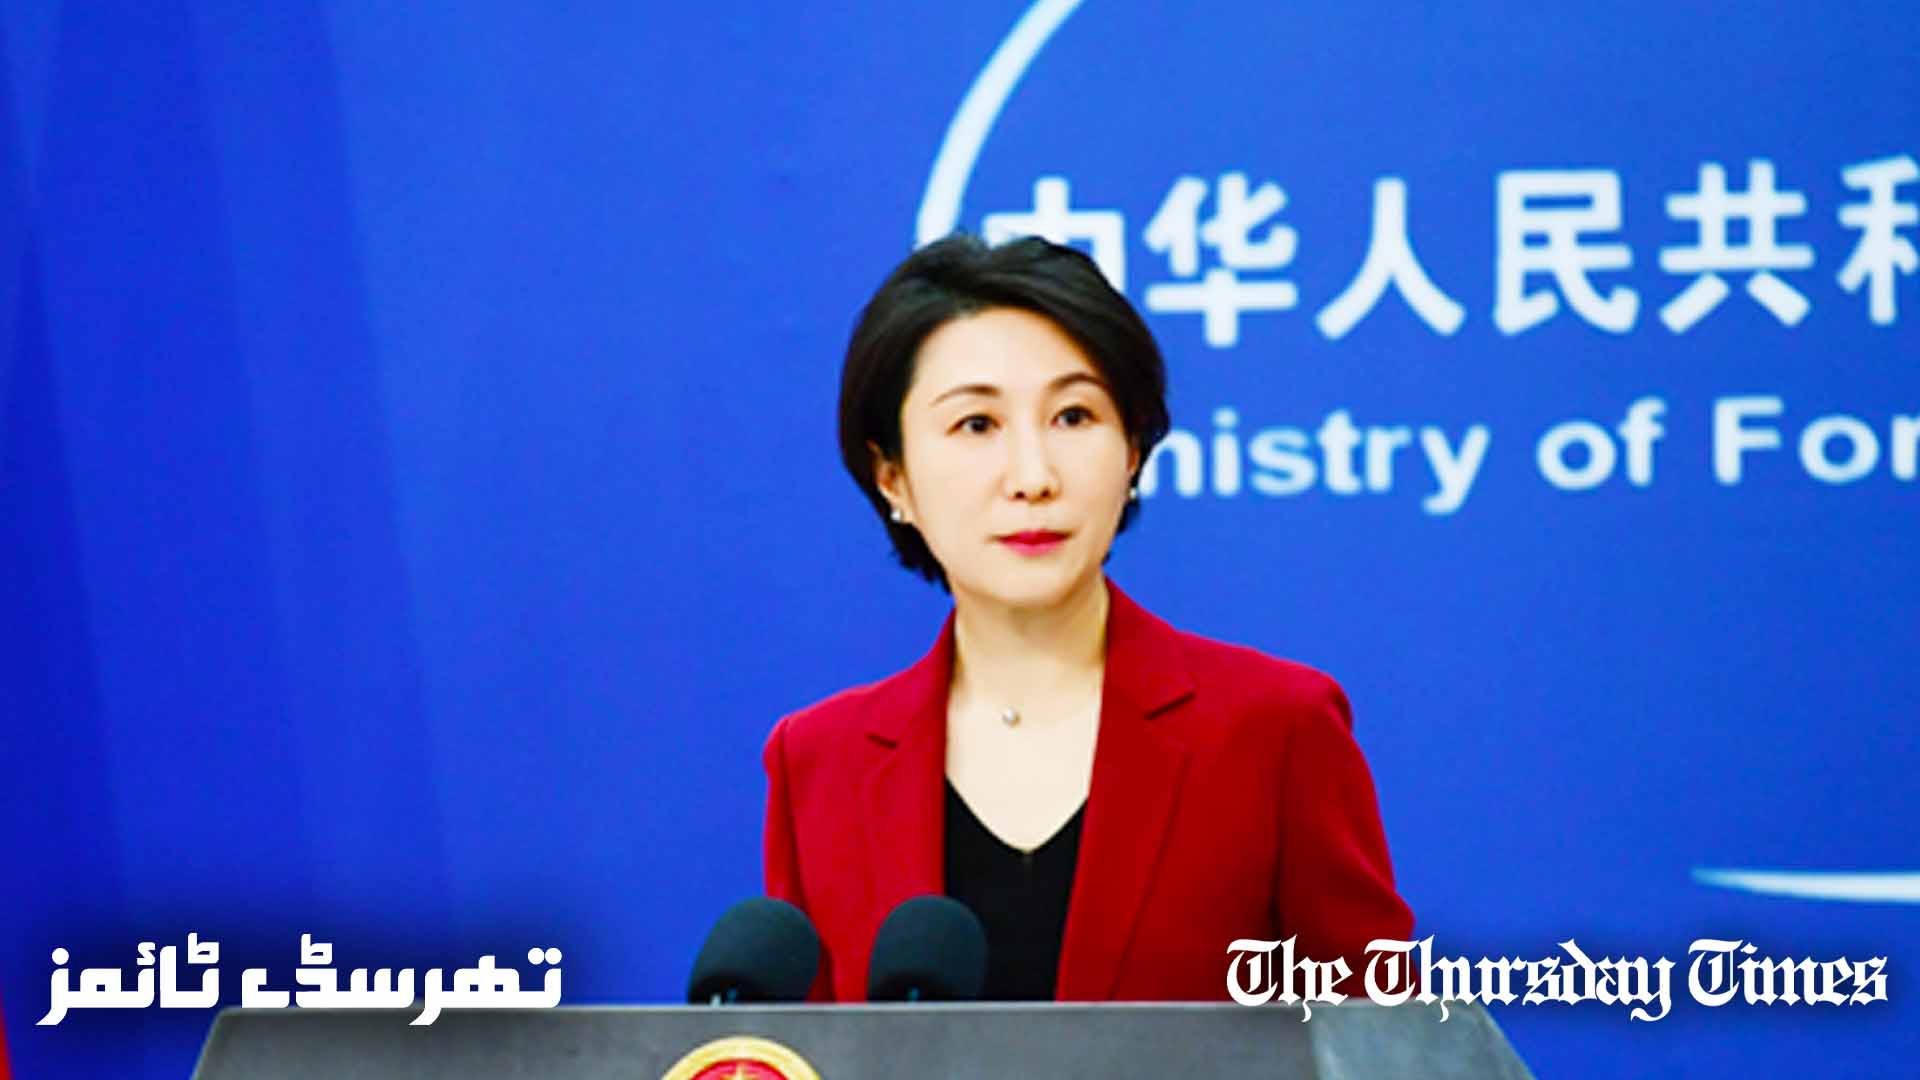 A file photo is shown of Chinese foreign ministry spokesperson Mao Ning. — FILE/THE THURSDAY TIMES